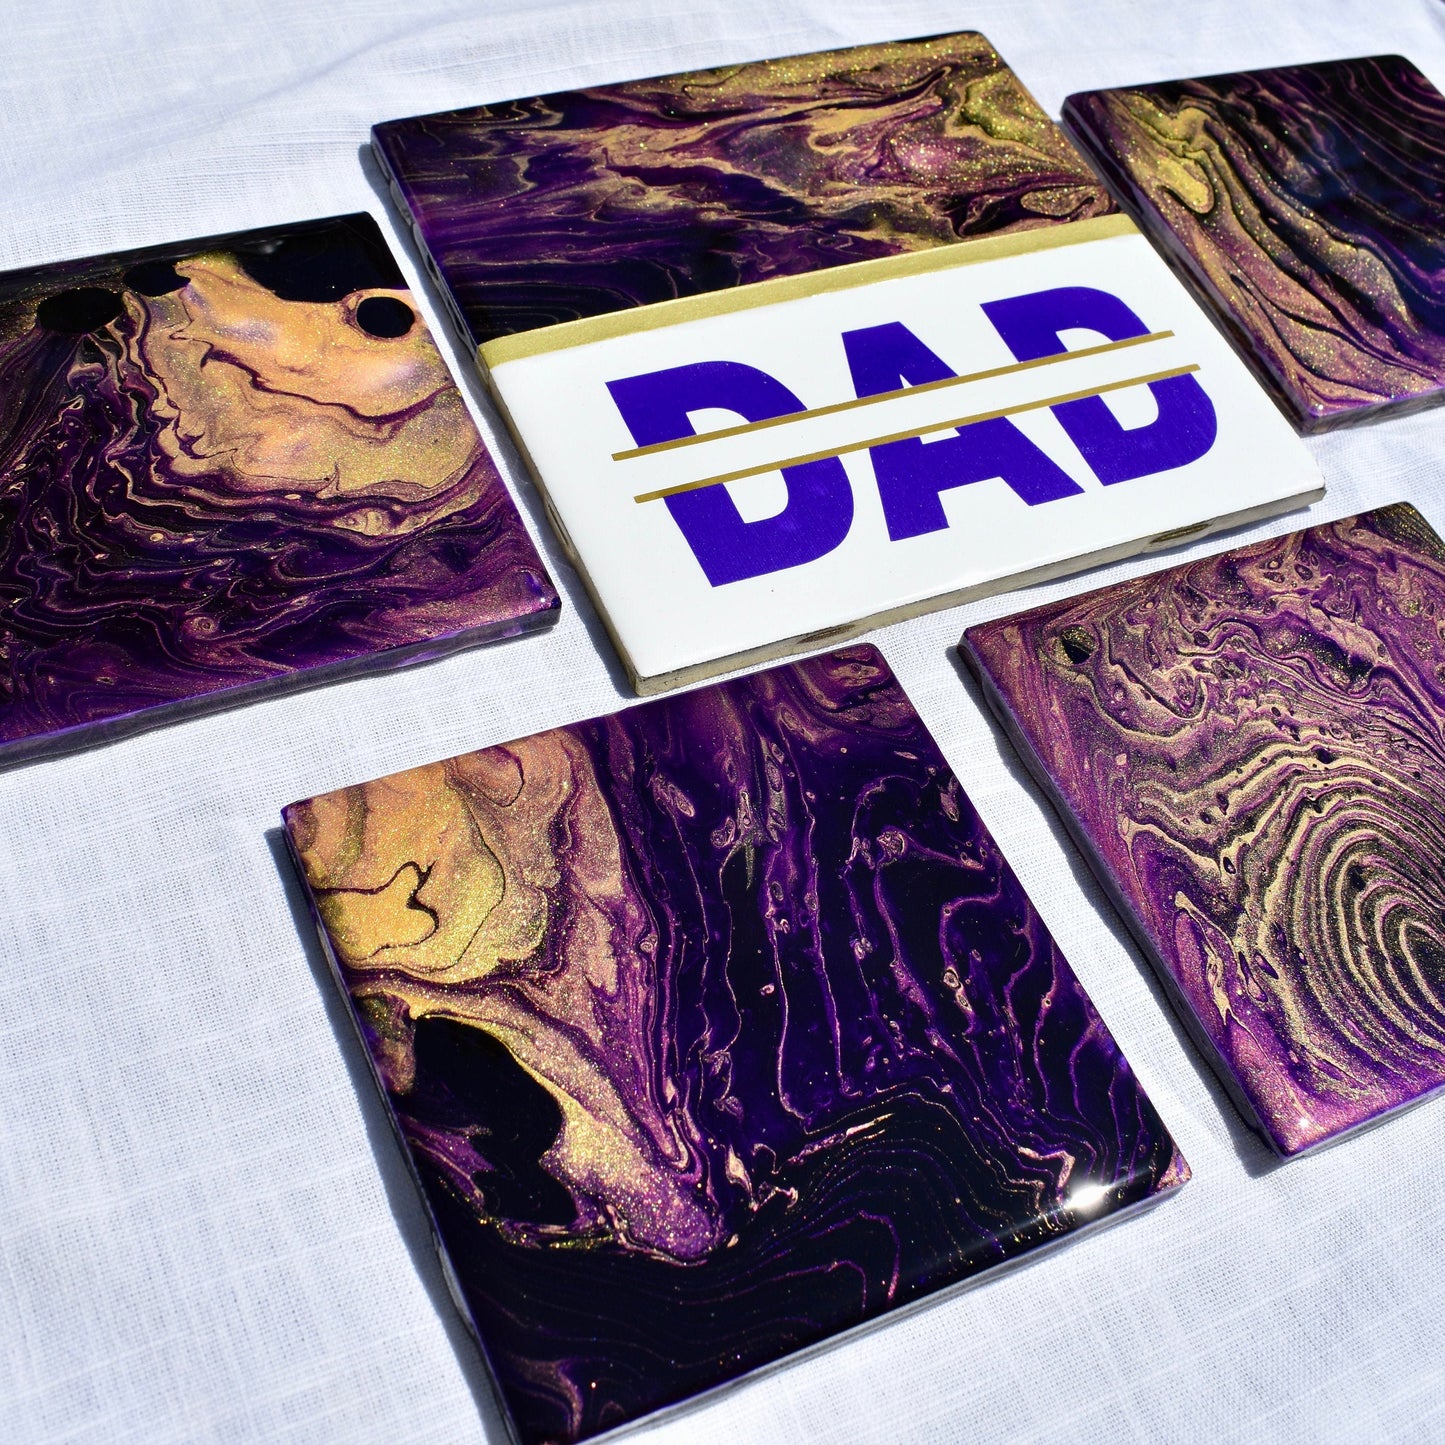 Personalized Dad's Birthday Coasters - Father’s Day Gift - Omega Psi Phi Gift - Purple & Gold Gift - Fraternity Gift - Custom Name Coasters